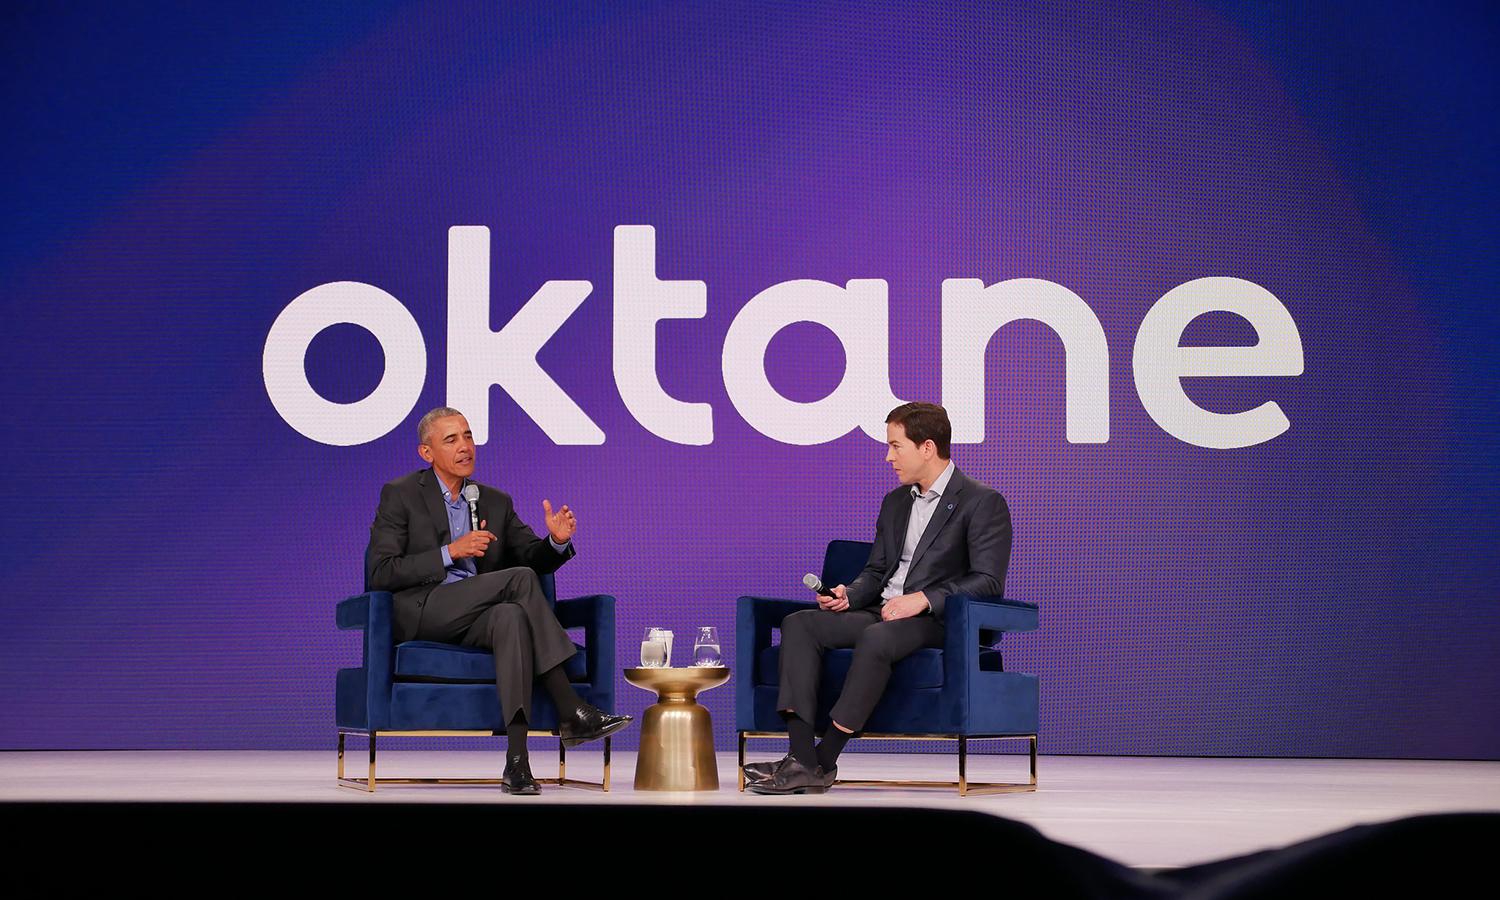 Today’s columnist, Russell Spitler of Nudge Security, offers tips for warding off shadow supply chain attacks like the Okta breach. (&#8220;President Barack Obama Keynote at Oktane18&#8221; by aaronparecki is marked with CC BY 2.0.)